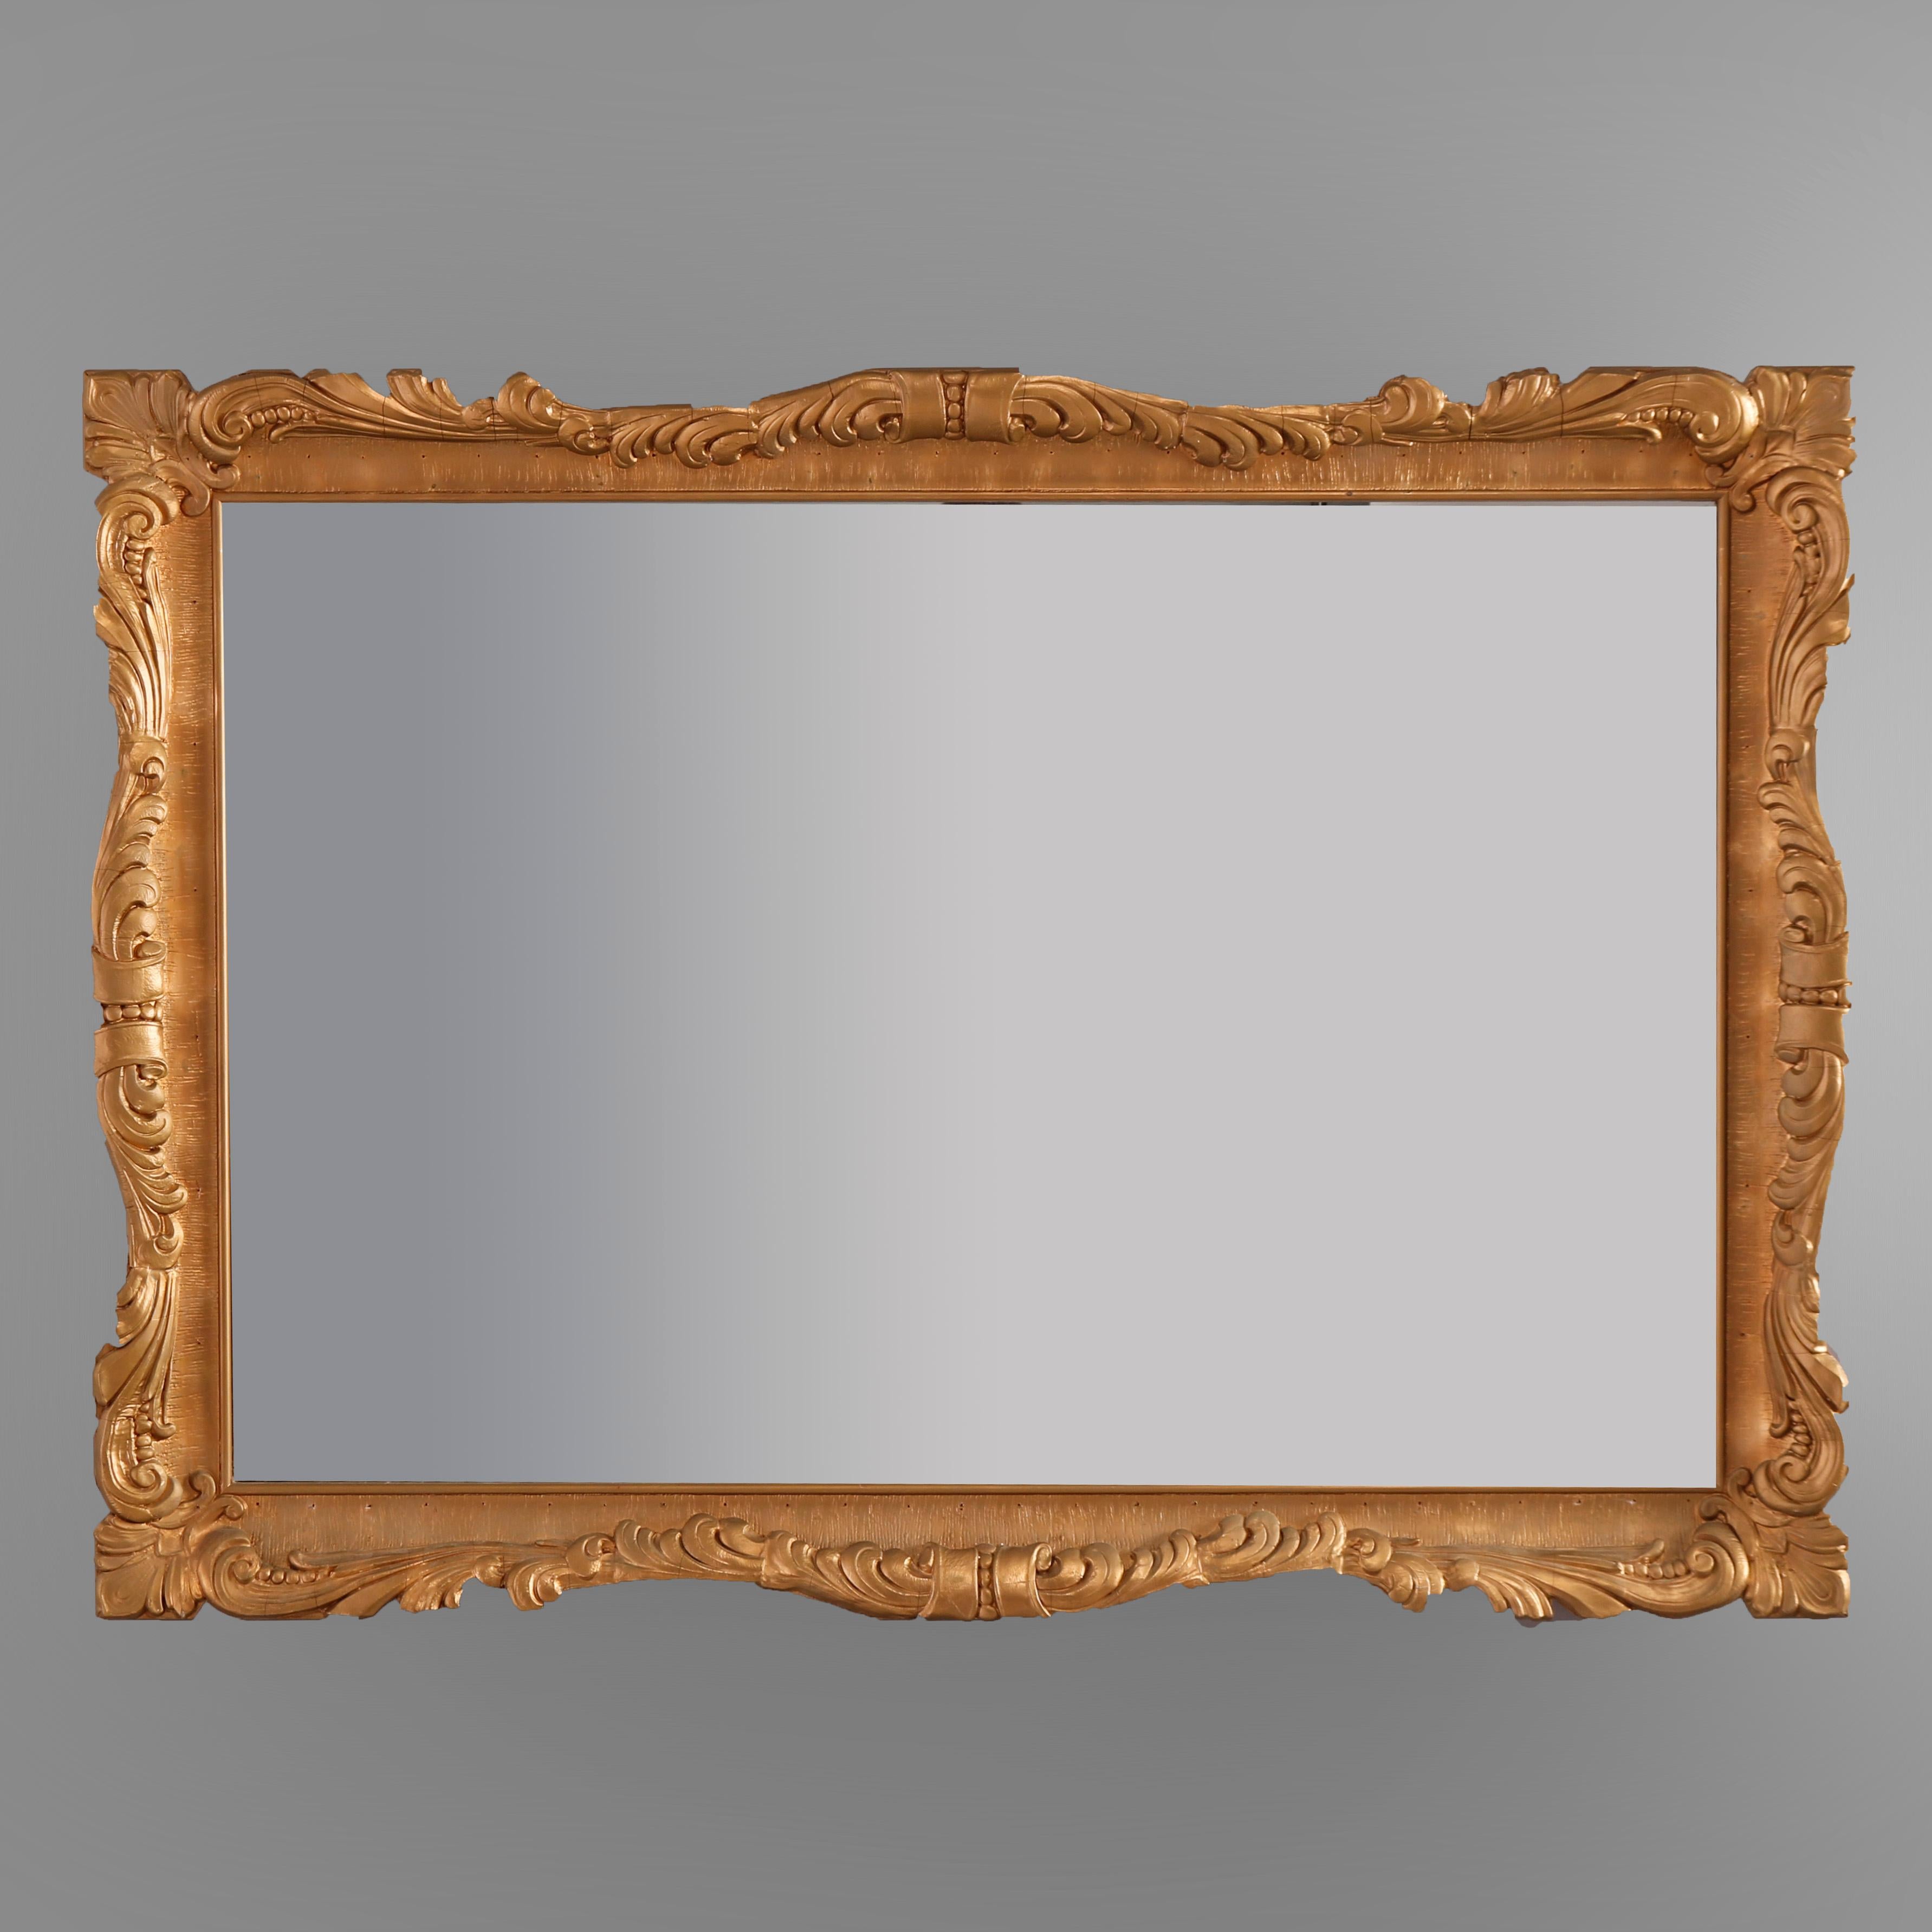 An antique French Louis XIV style wall mirror offers giltwood frame with foliate and scroll elements, c1920

Measures - 34.25